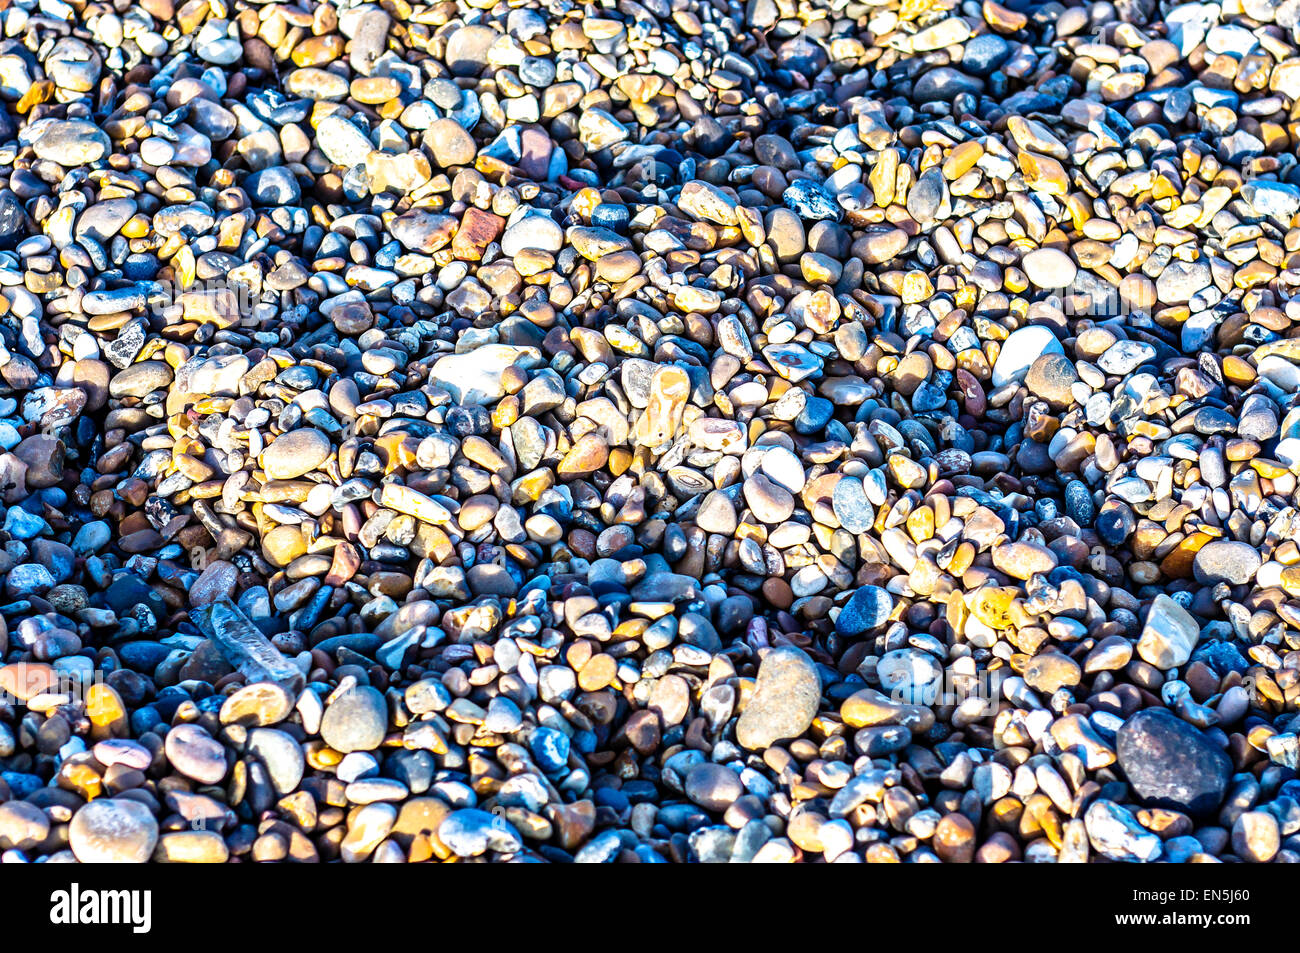 Close-up of the beautifully coloured pieces of stone comprising a gravel beach, sometimes called a shingle beach, in the UK. Stock Photo